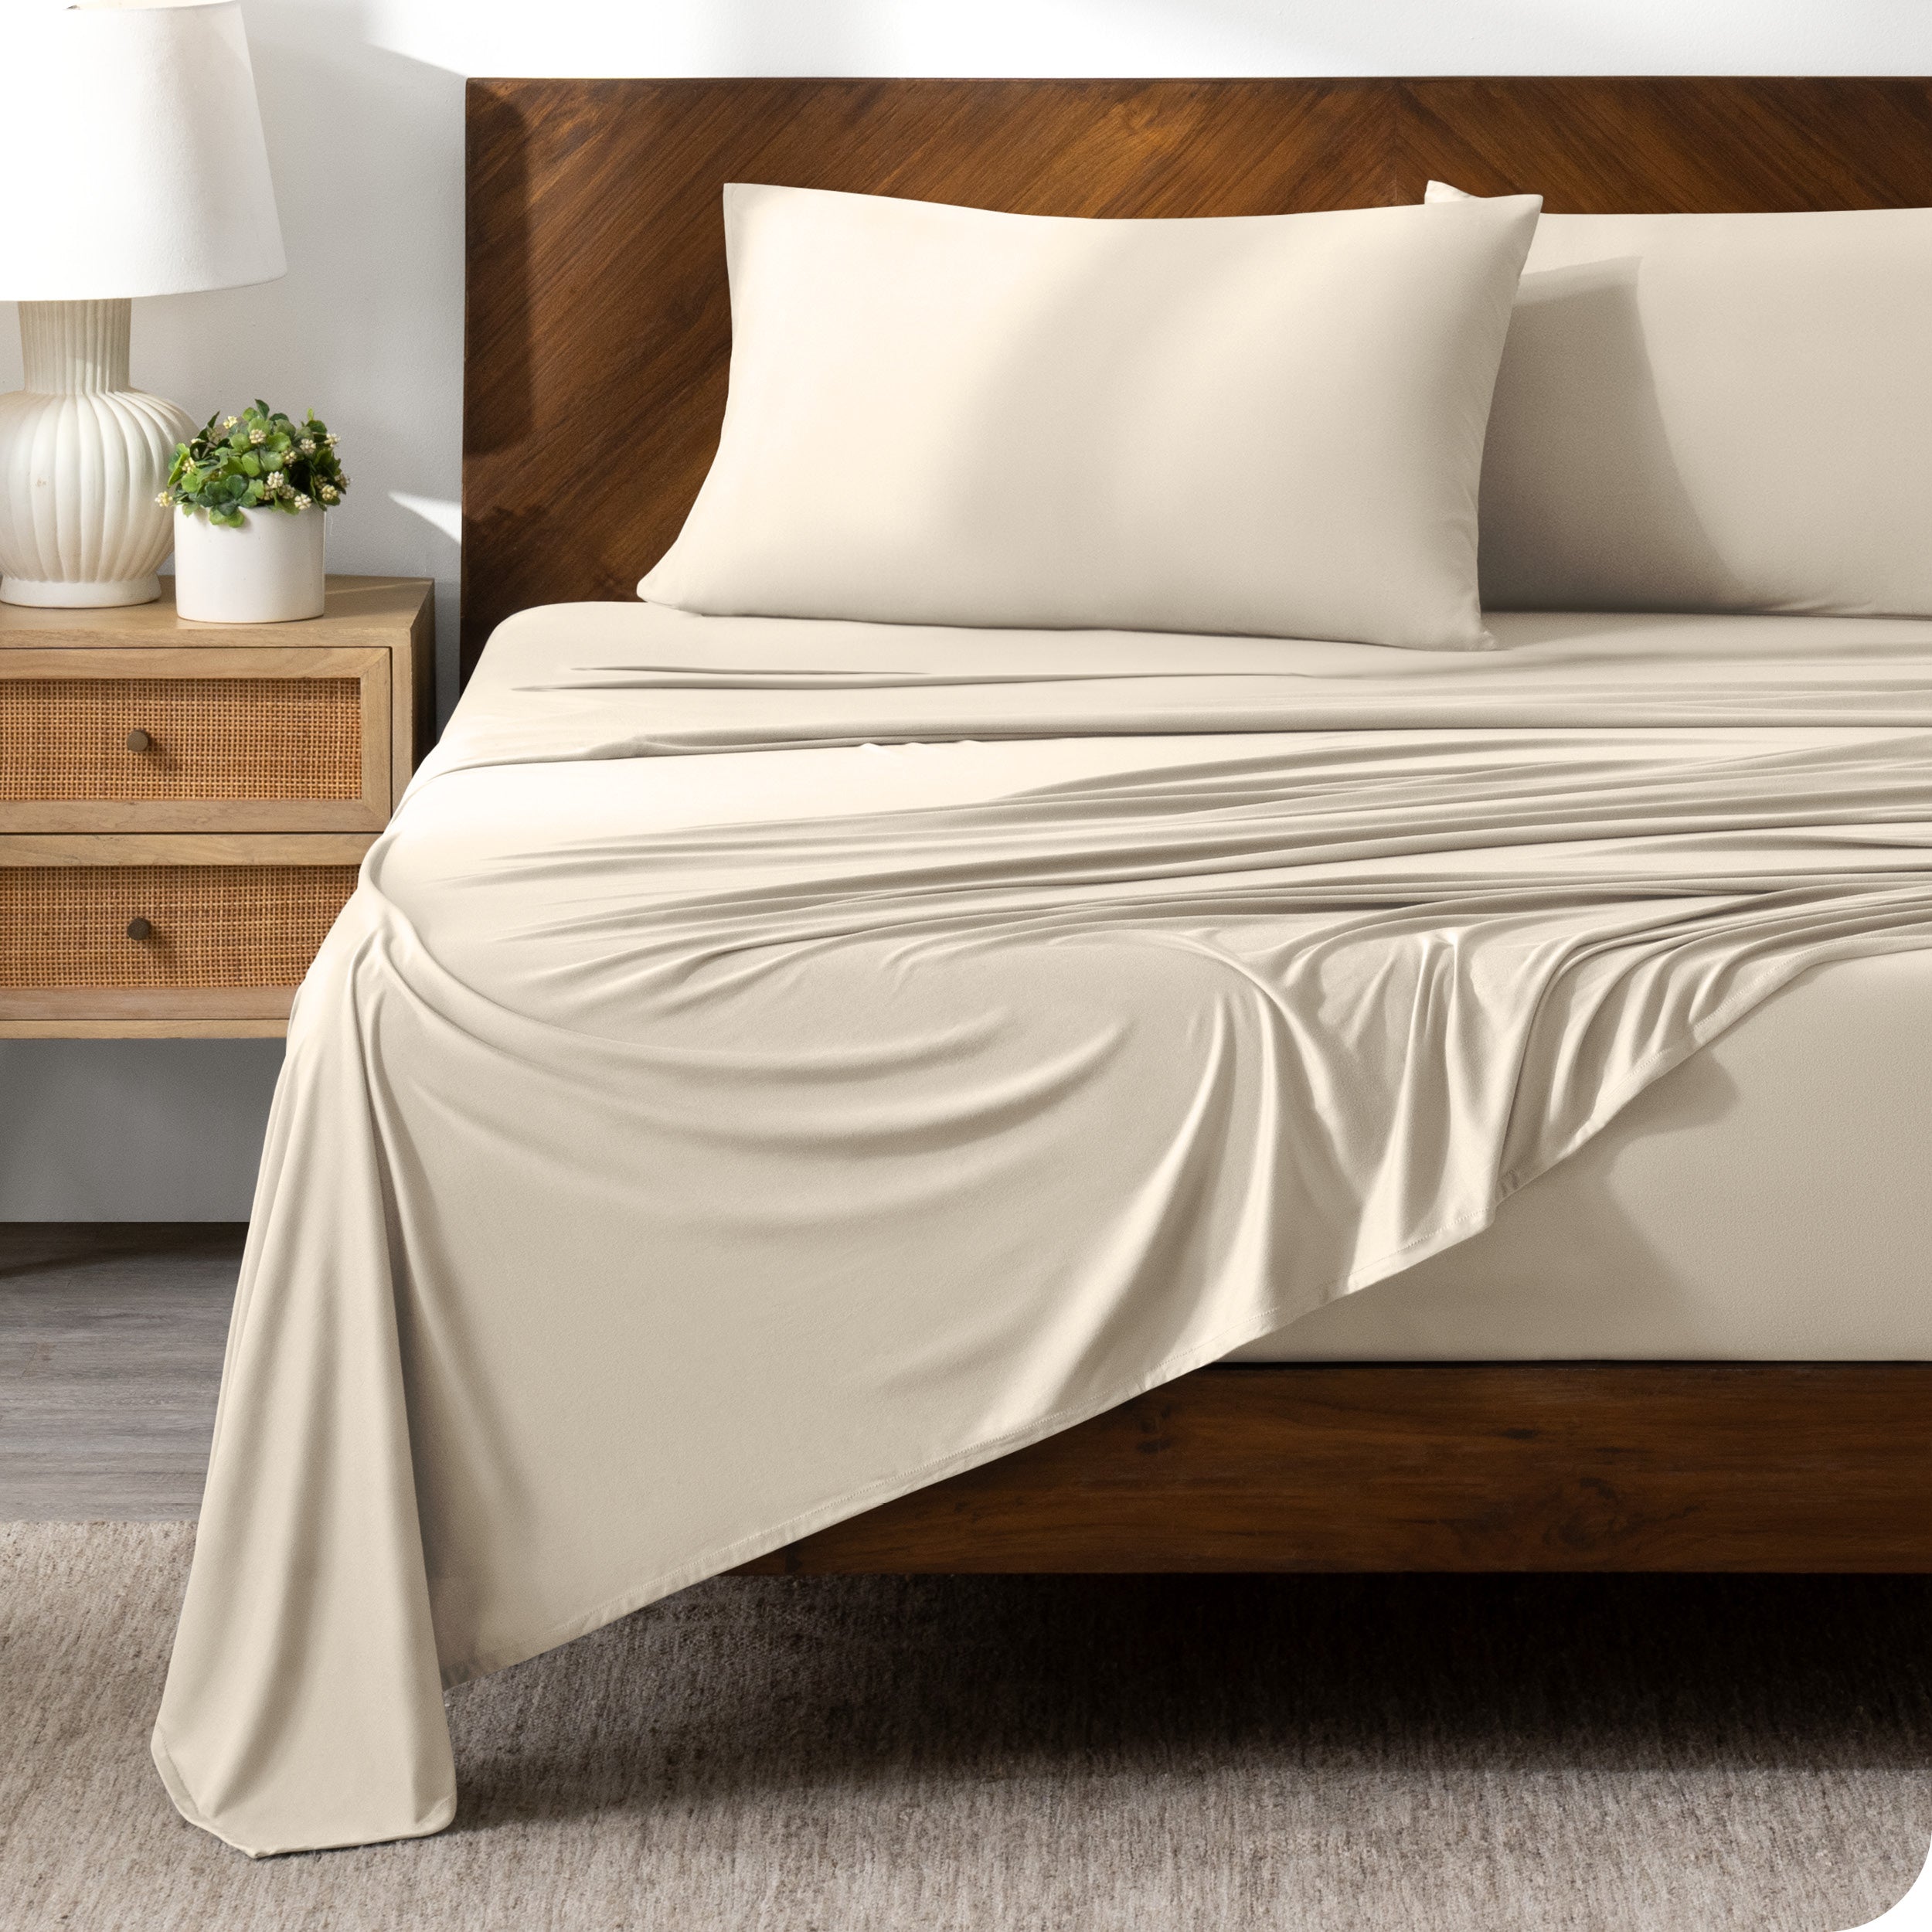 Sand sheet set on a bed with a dark wooden bed frame